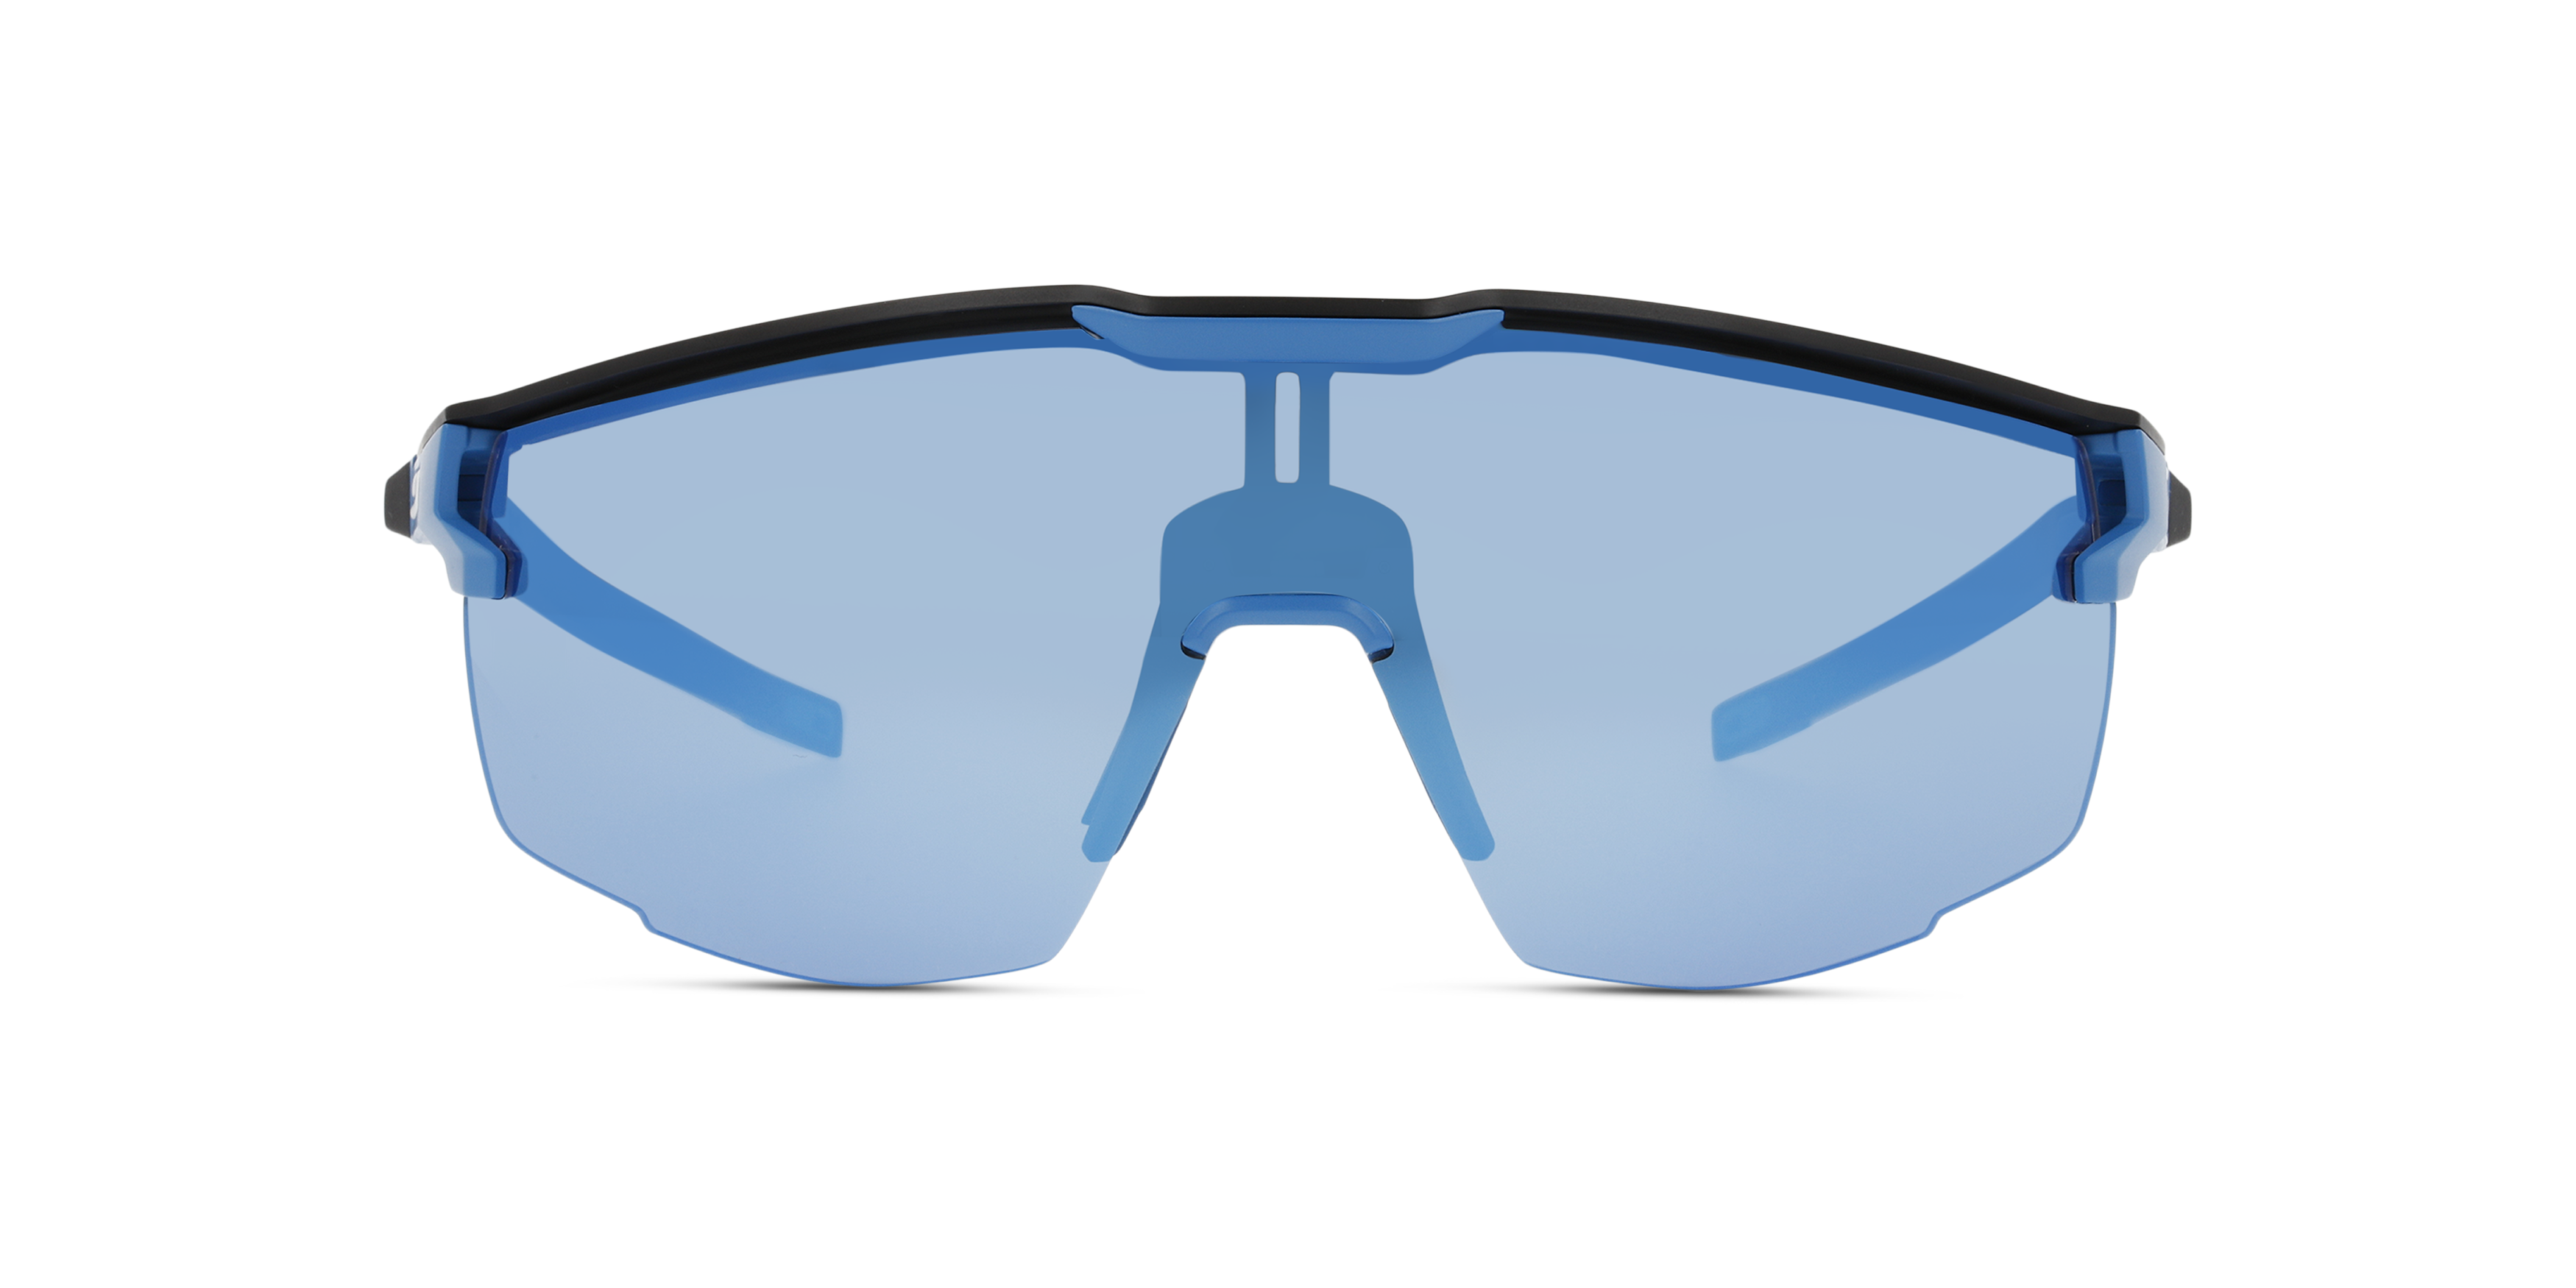 [products.image.front] Julbo ULTIMATE J546 1132